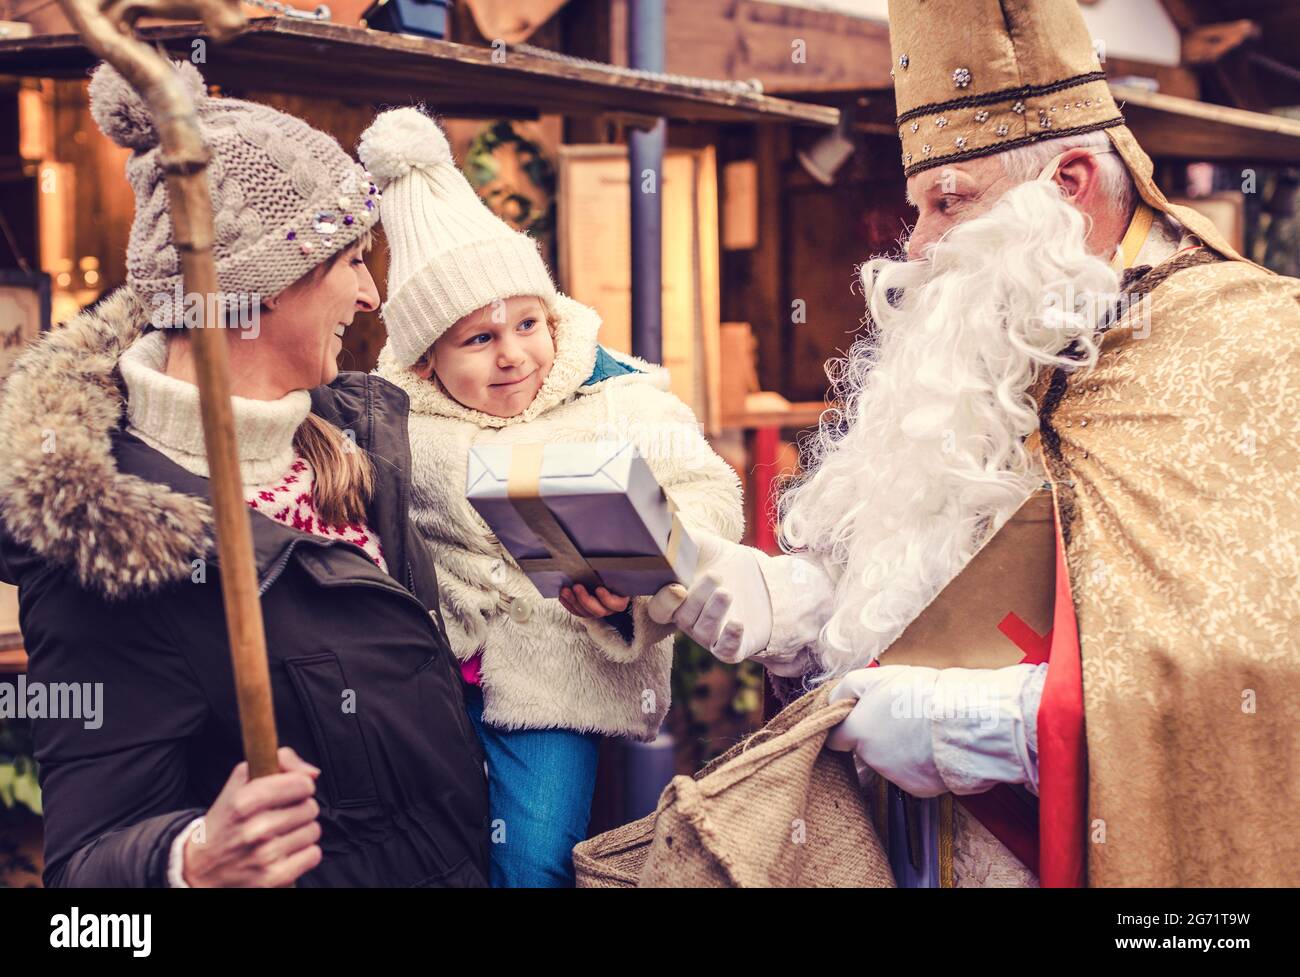 St Nicholas with his staff and presents meeting a family on the Christmas market Stock Photo